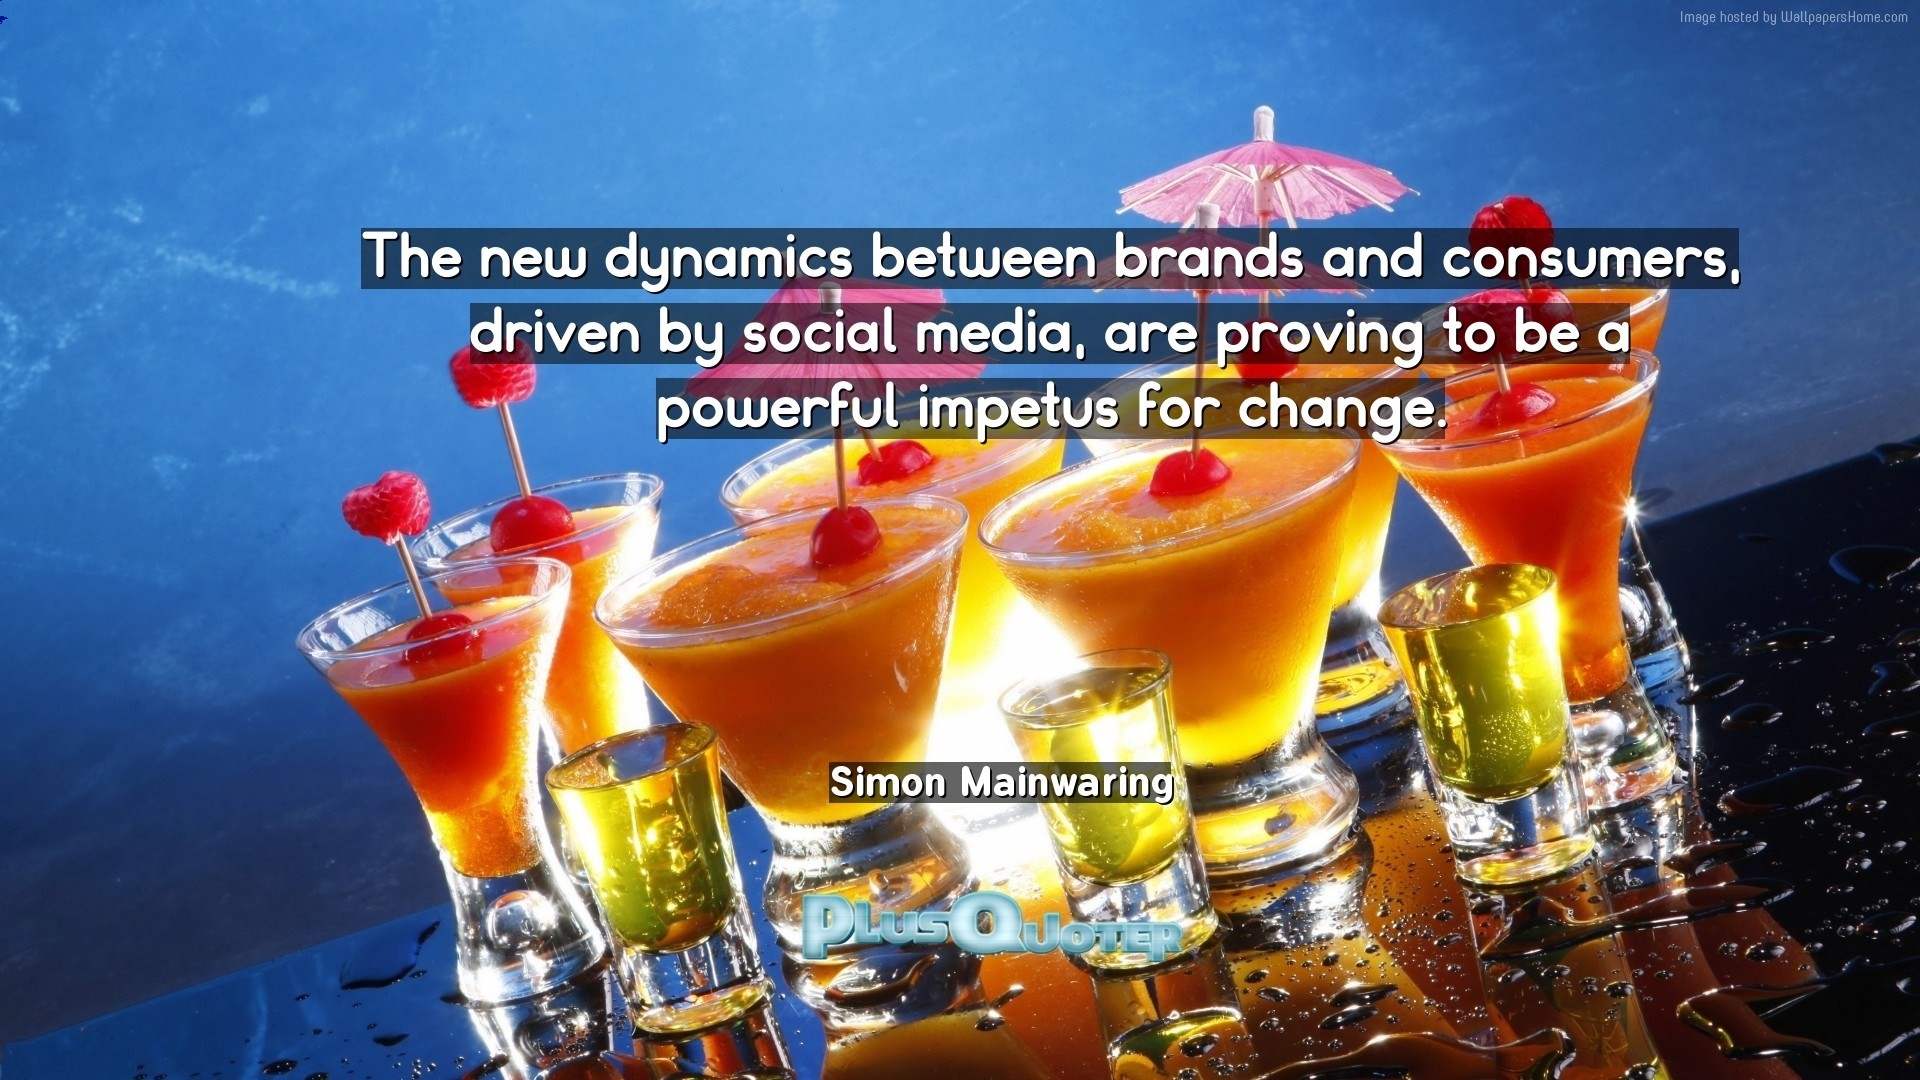 Download Wallpaper With Inspirational Quotes Quot The New Dynamics Between Brands And Consumers Driven 1920x1080